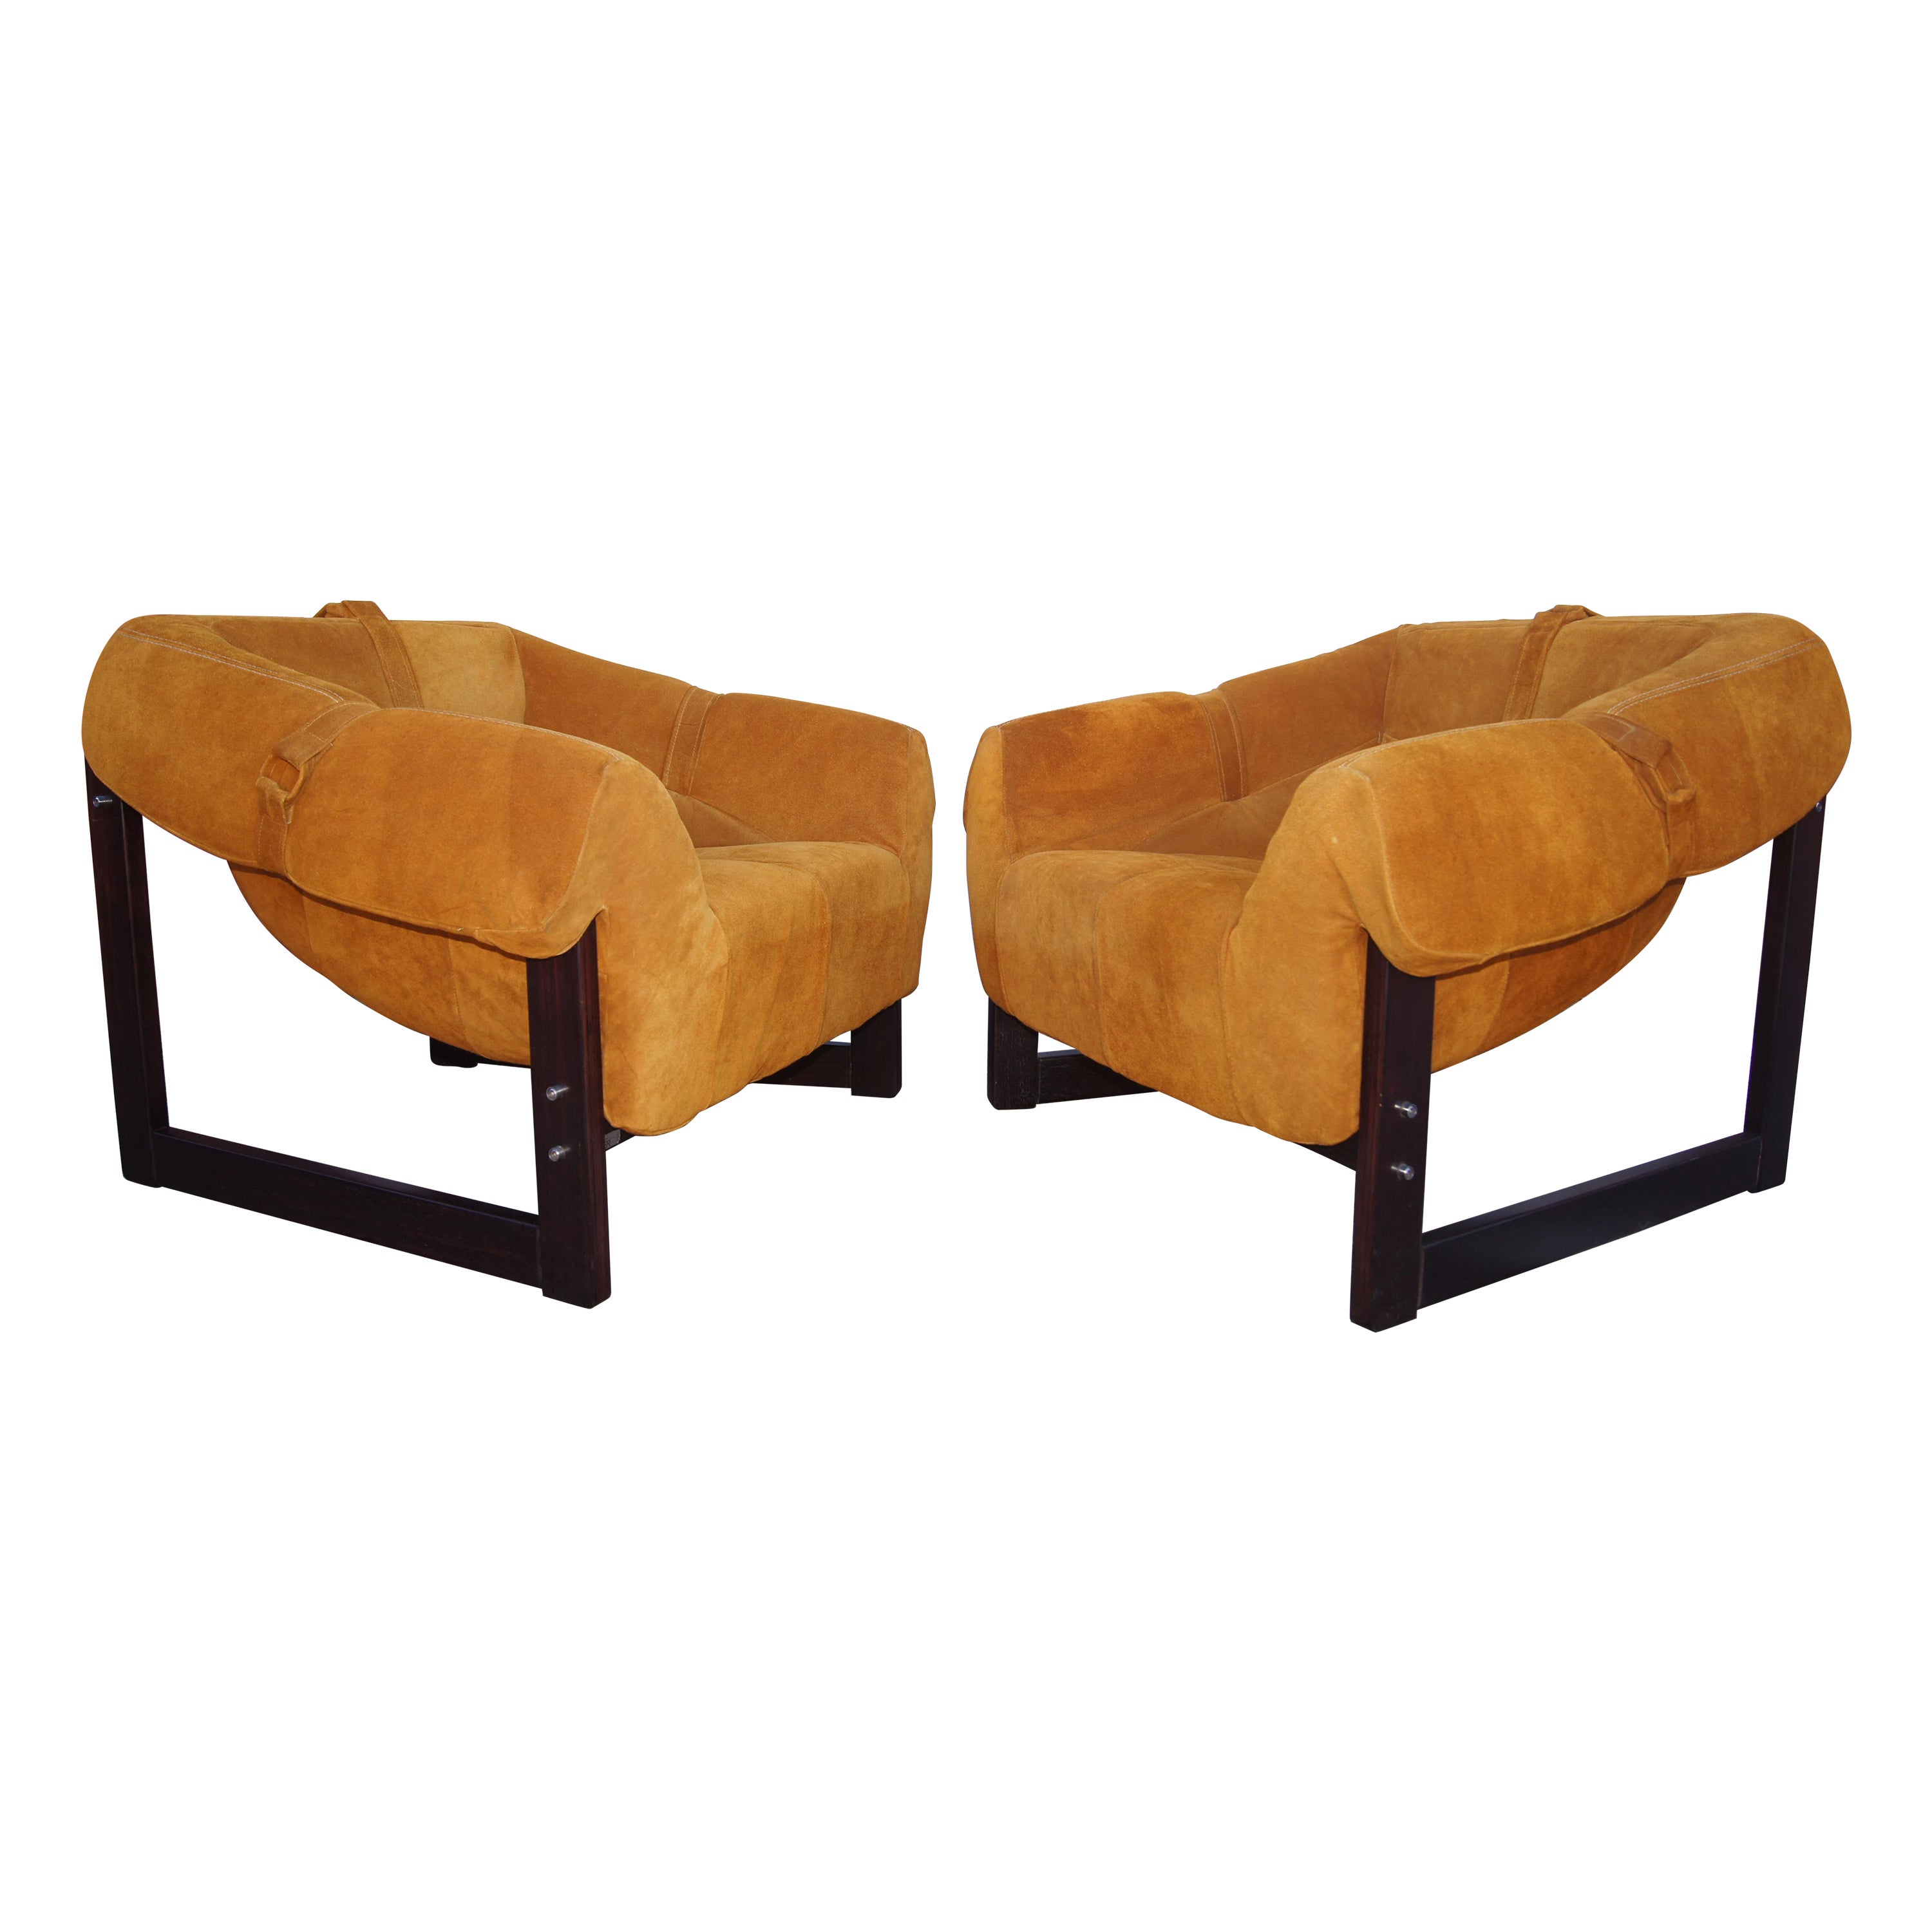 Pair of Rosewood and Suede MP-091 Lounge Chairs by Percival Lafer